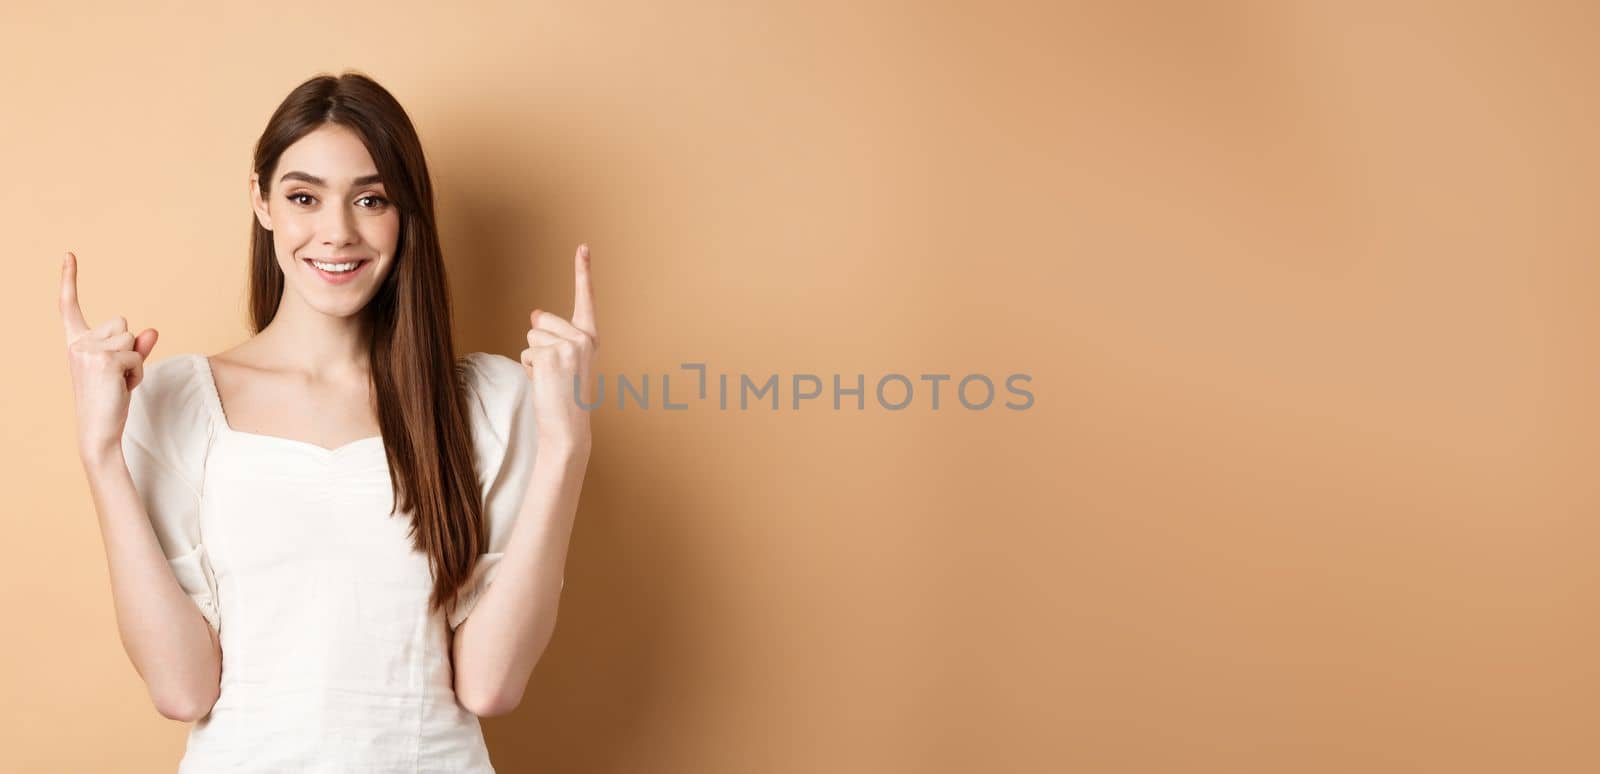 Attractive caucasian woman in dress pointing fingers up, smiling and showing promo banner, standing on beige background.